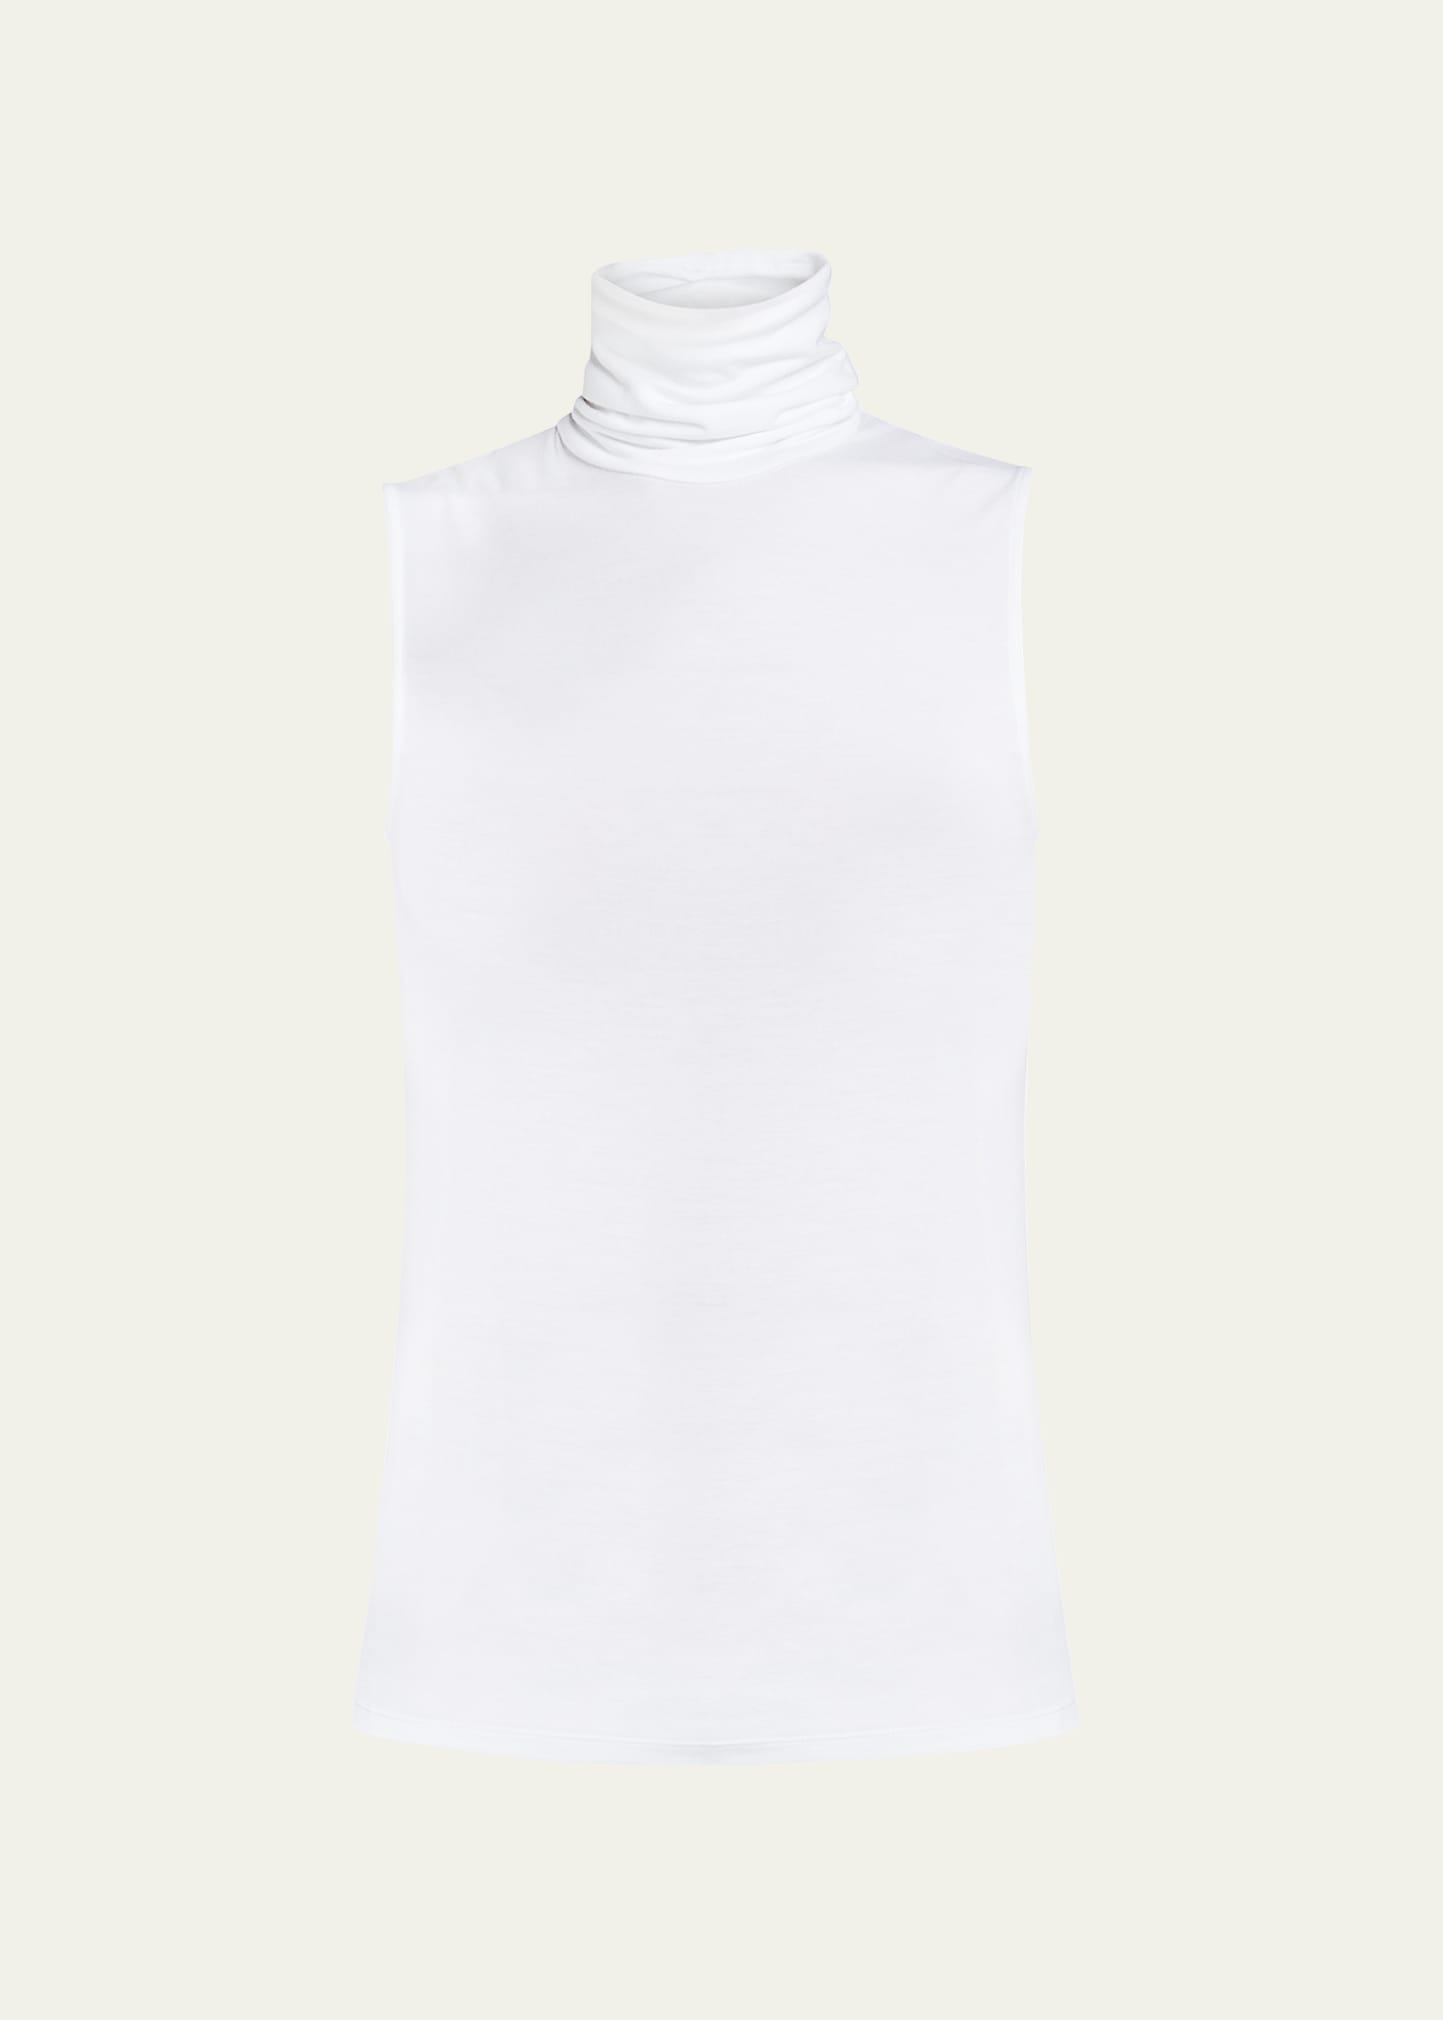 Majestic Soft Touch Viscose Sleeveless Turtleneck Top In White